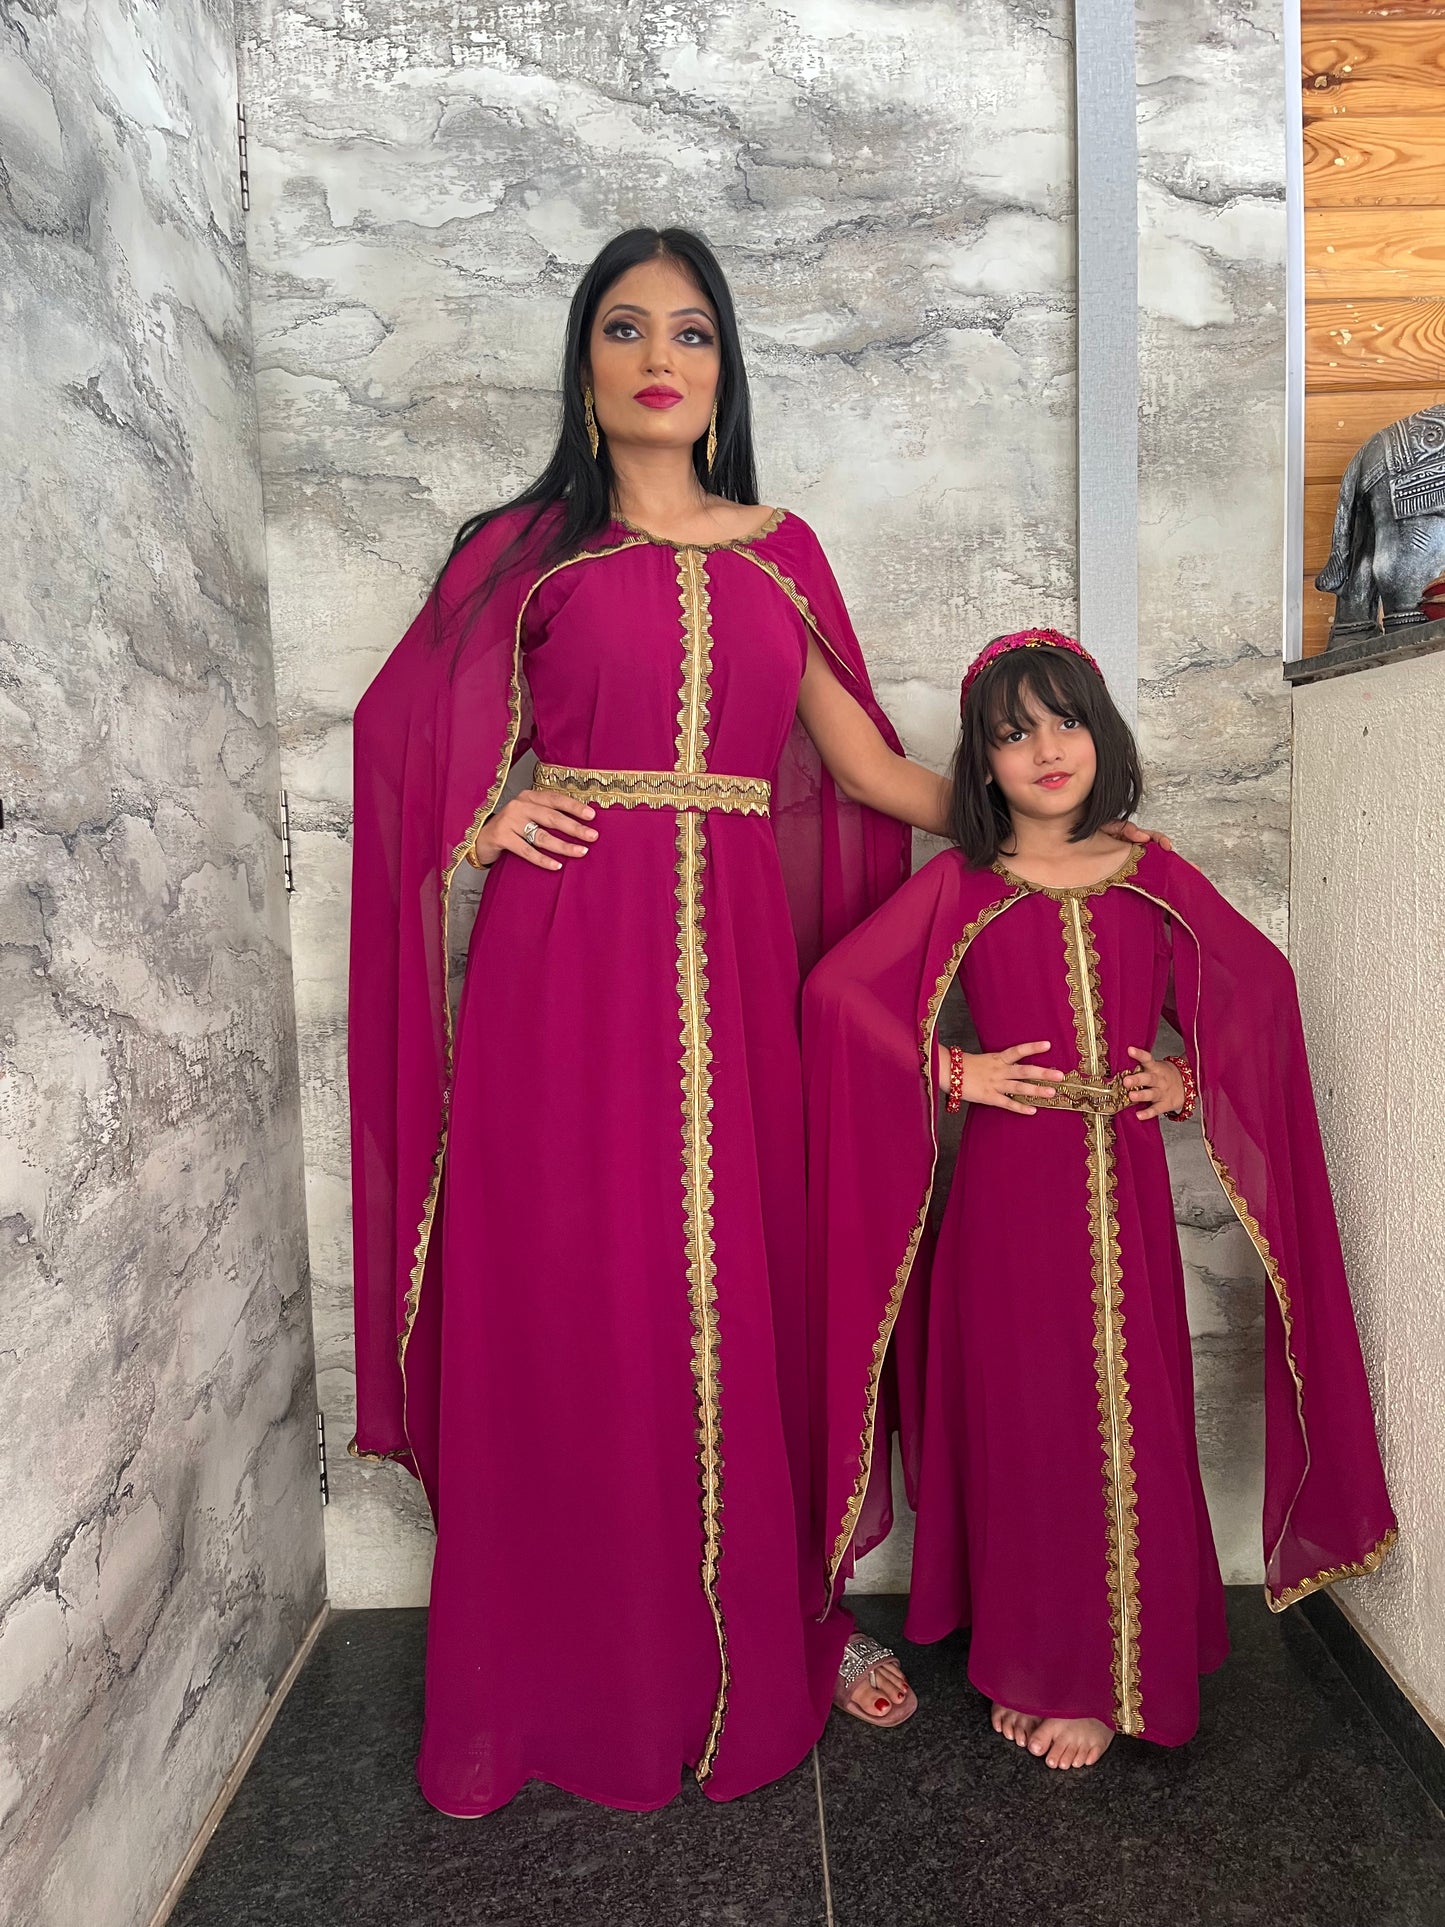 Takchita Kaftan Dress for Women with Embroidered Lace Mother Daughter Set